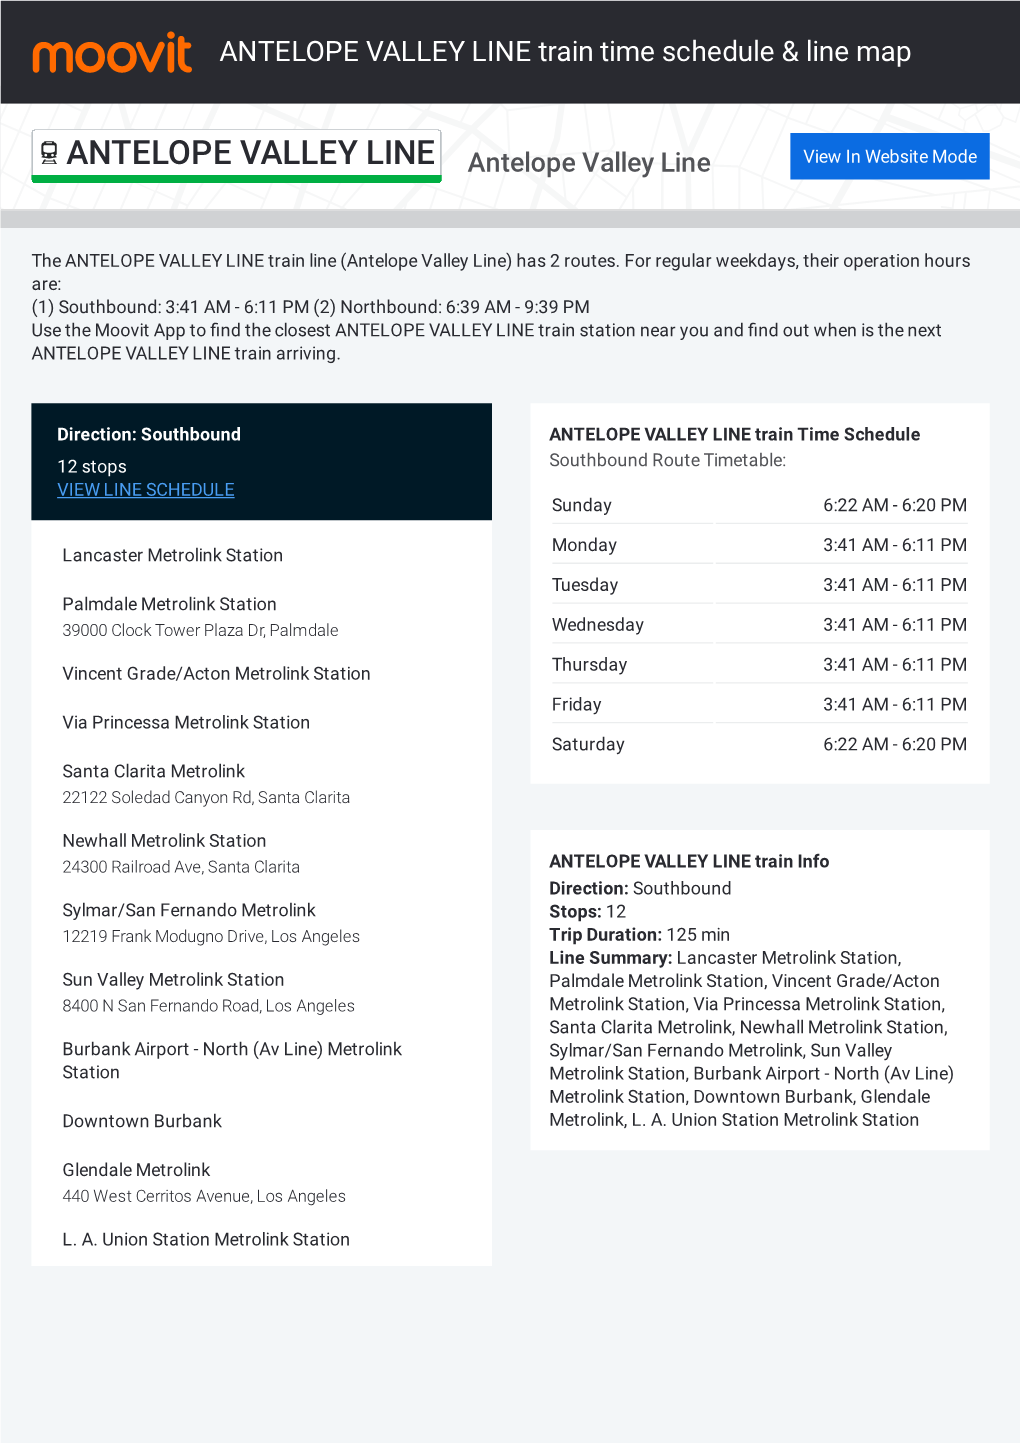 ANTELOPE VALLEY LINE Train Time Schedule & Line Route